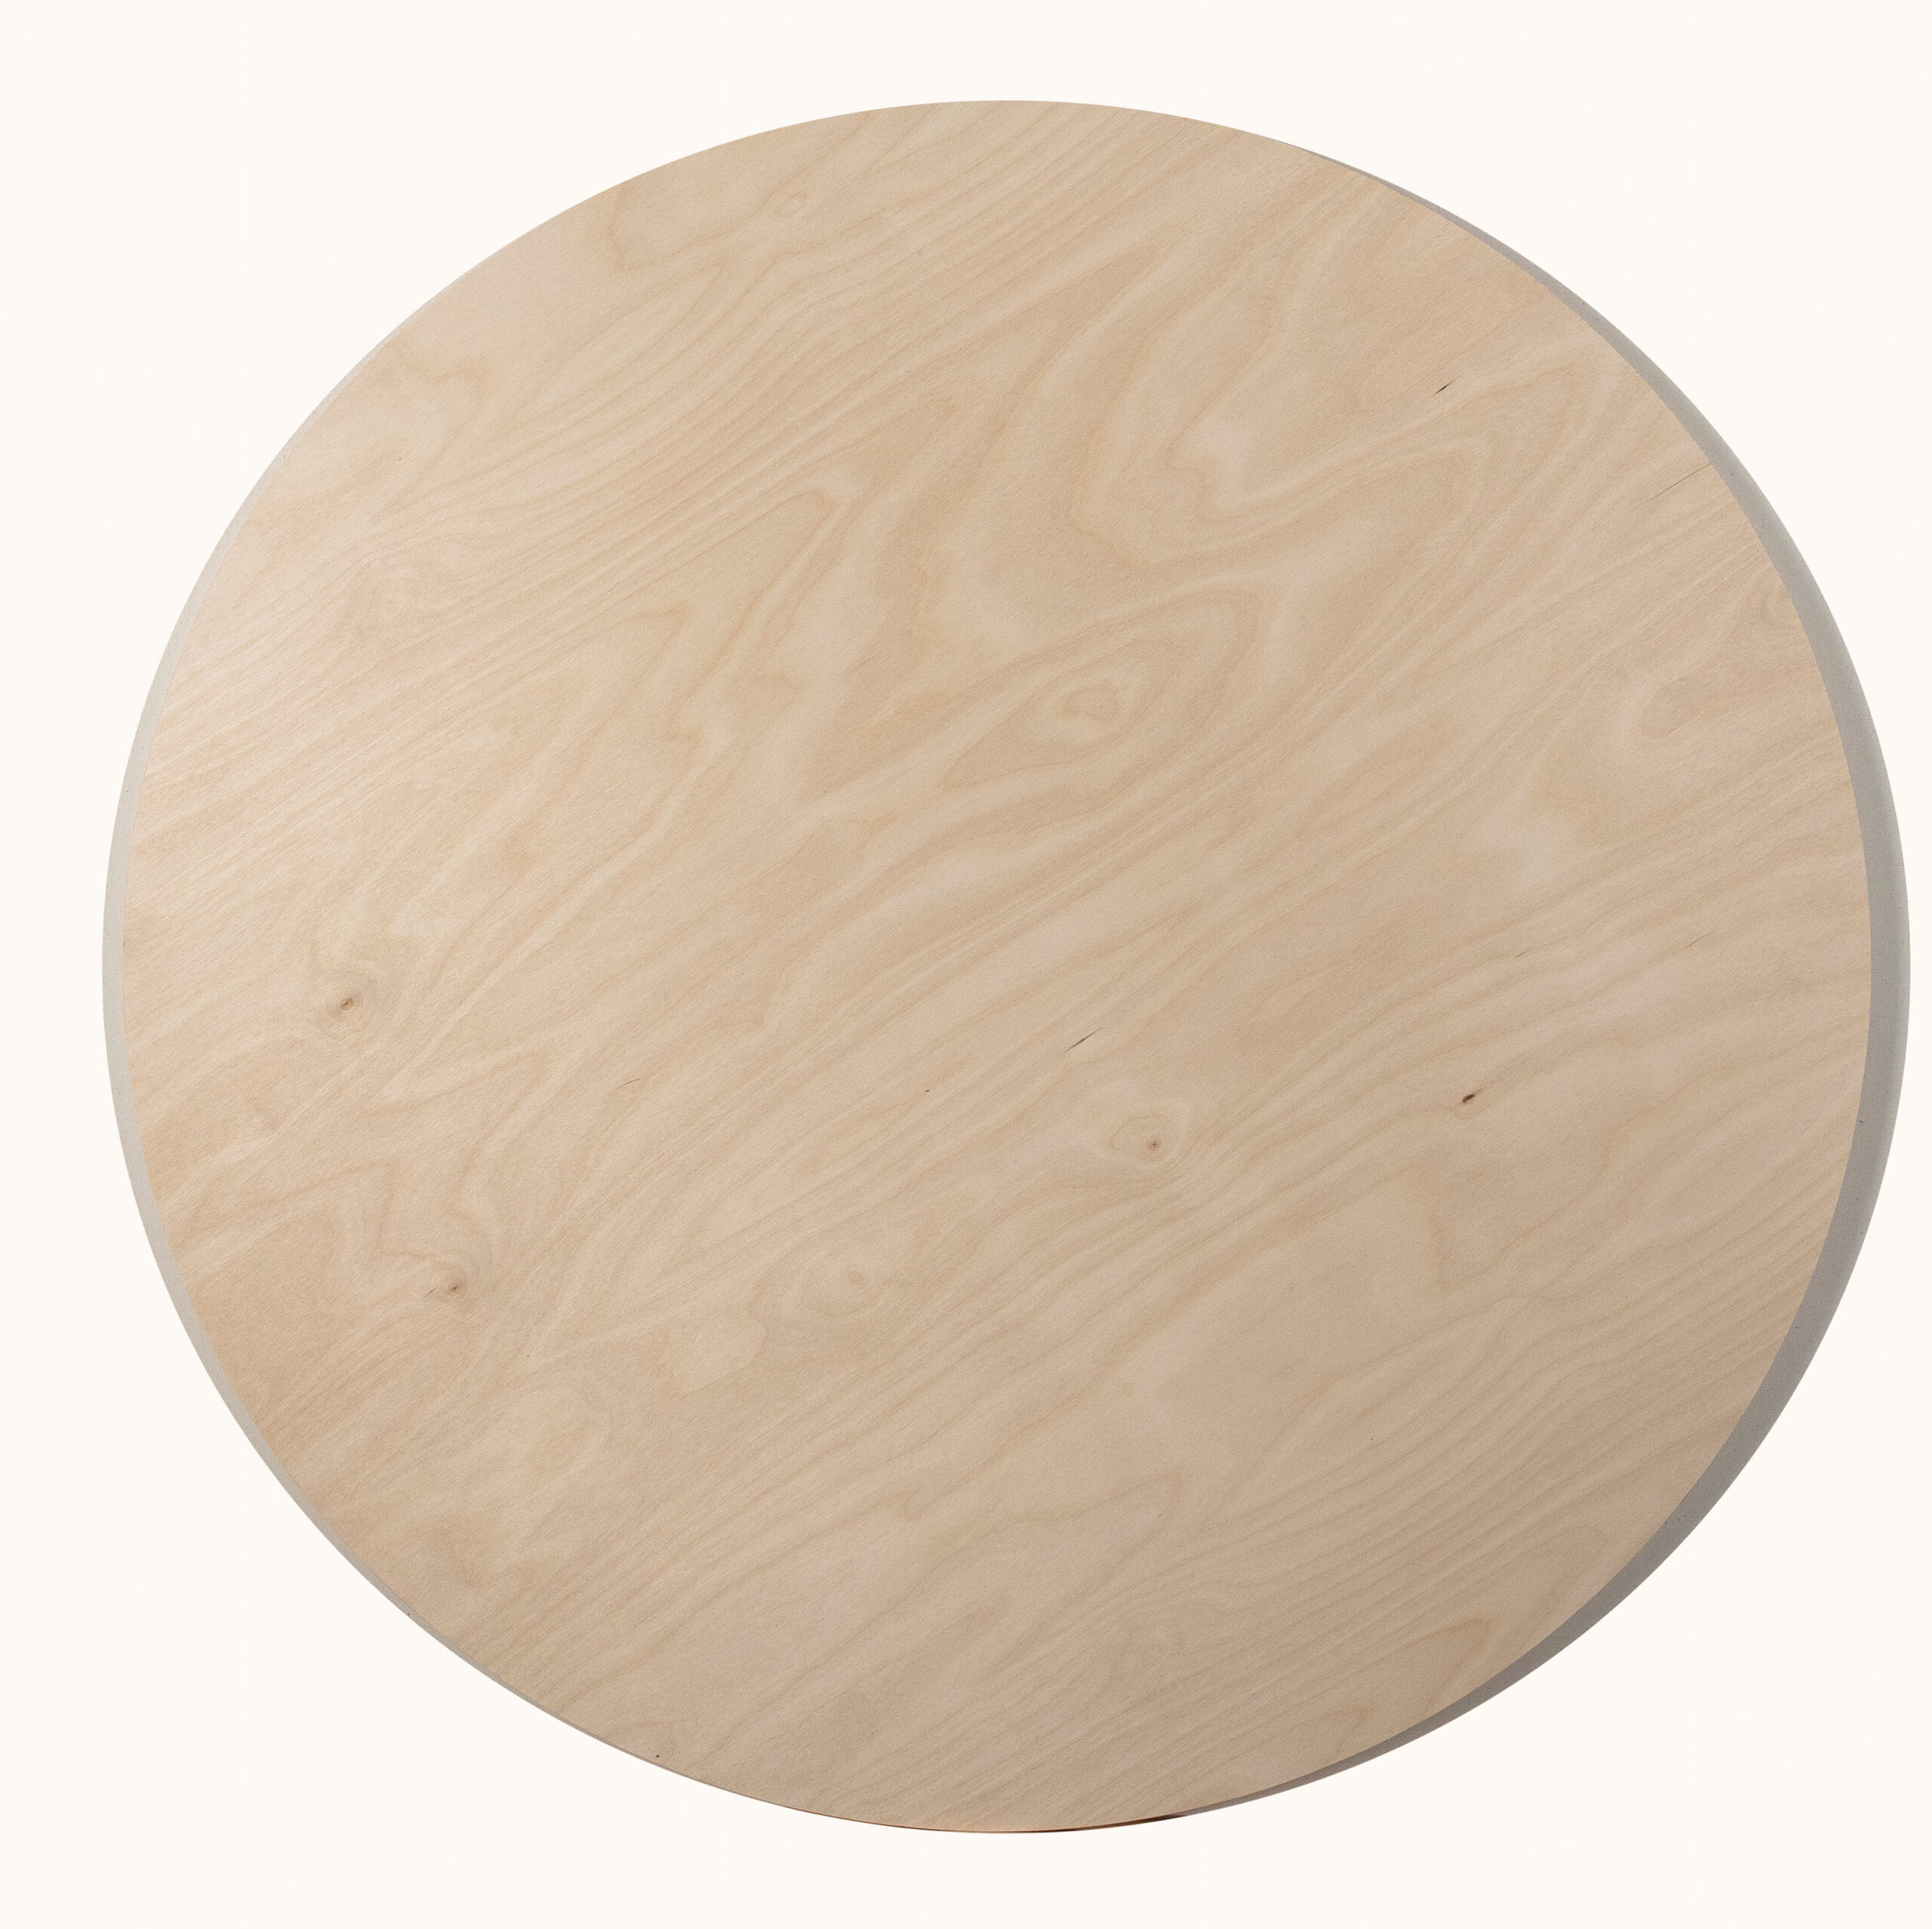 6 Pcs Round Wood Canvas Boards for Painting, 3 Different Sizes of Wooden  Canvas Panels, Unfinished Wood Cradled Painting Panel Boards for Arts,  Craft